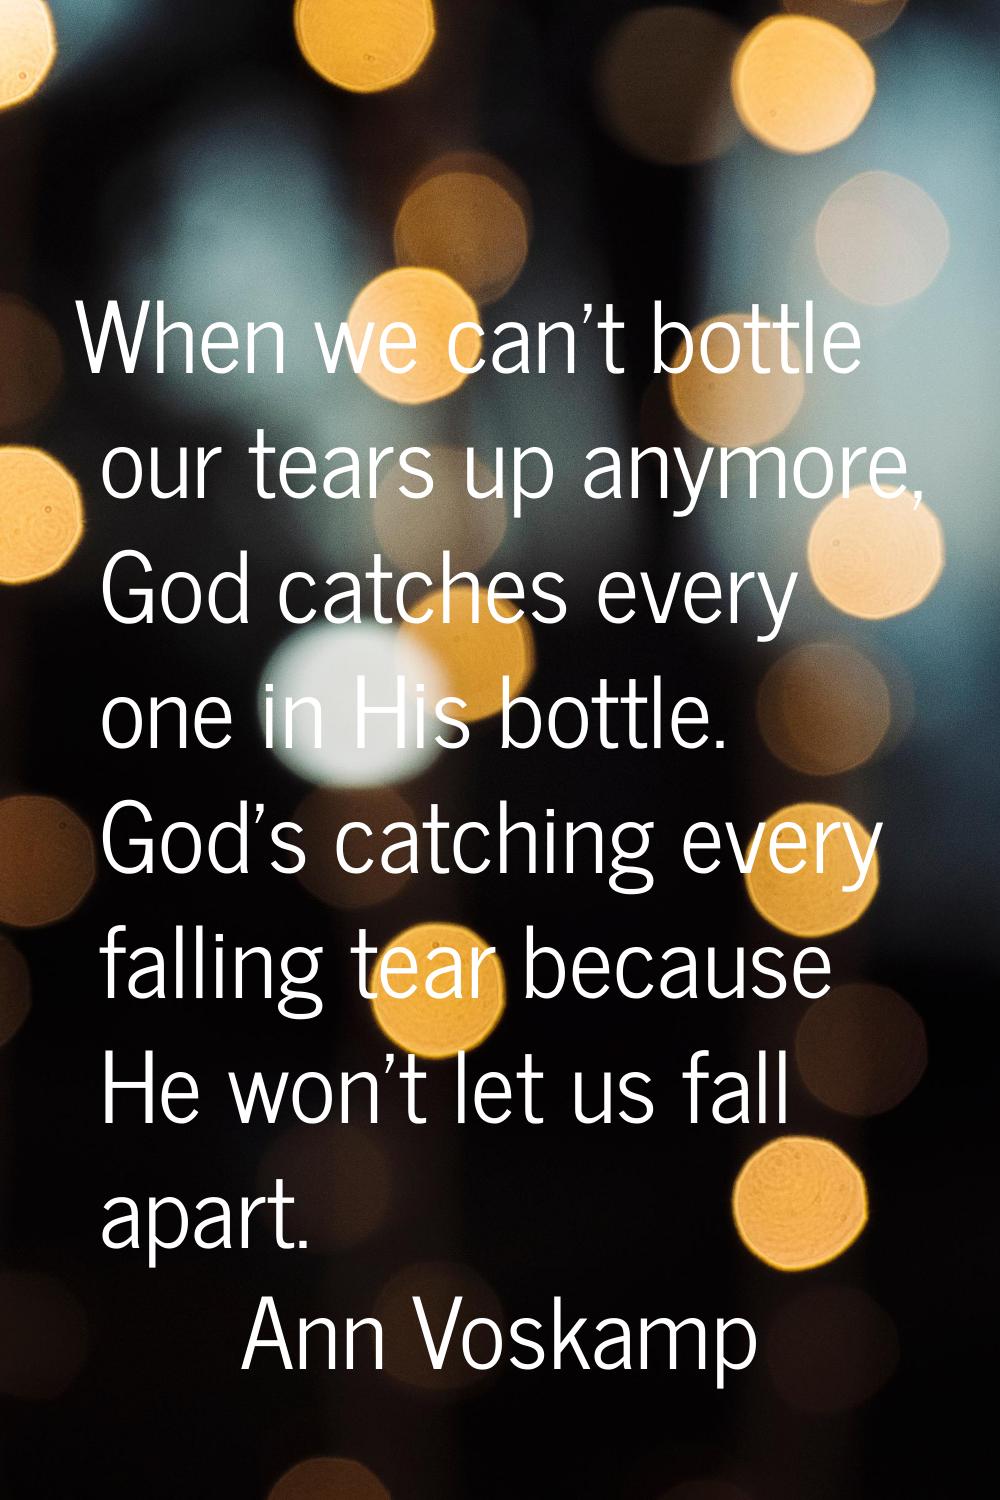 When we can't bottle our tears up anymore, God catches every one in His bottle. God's catching ever